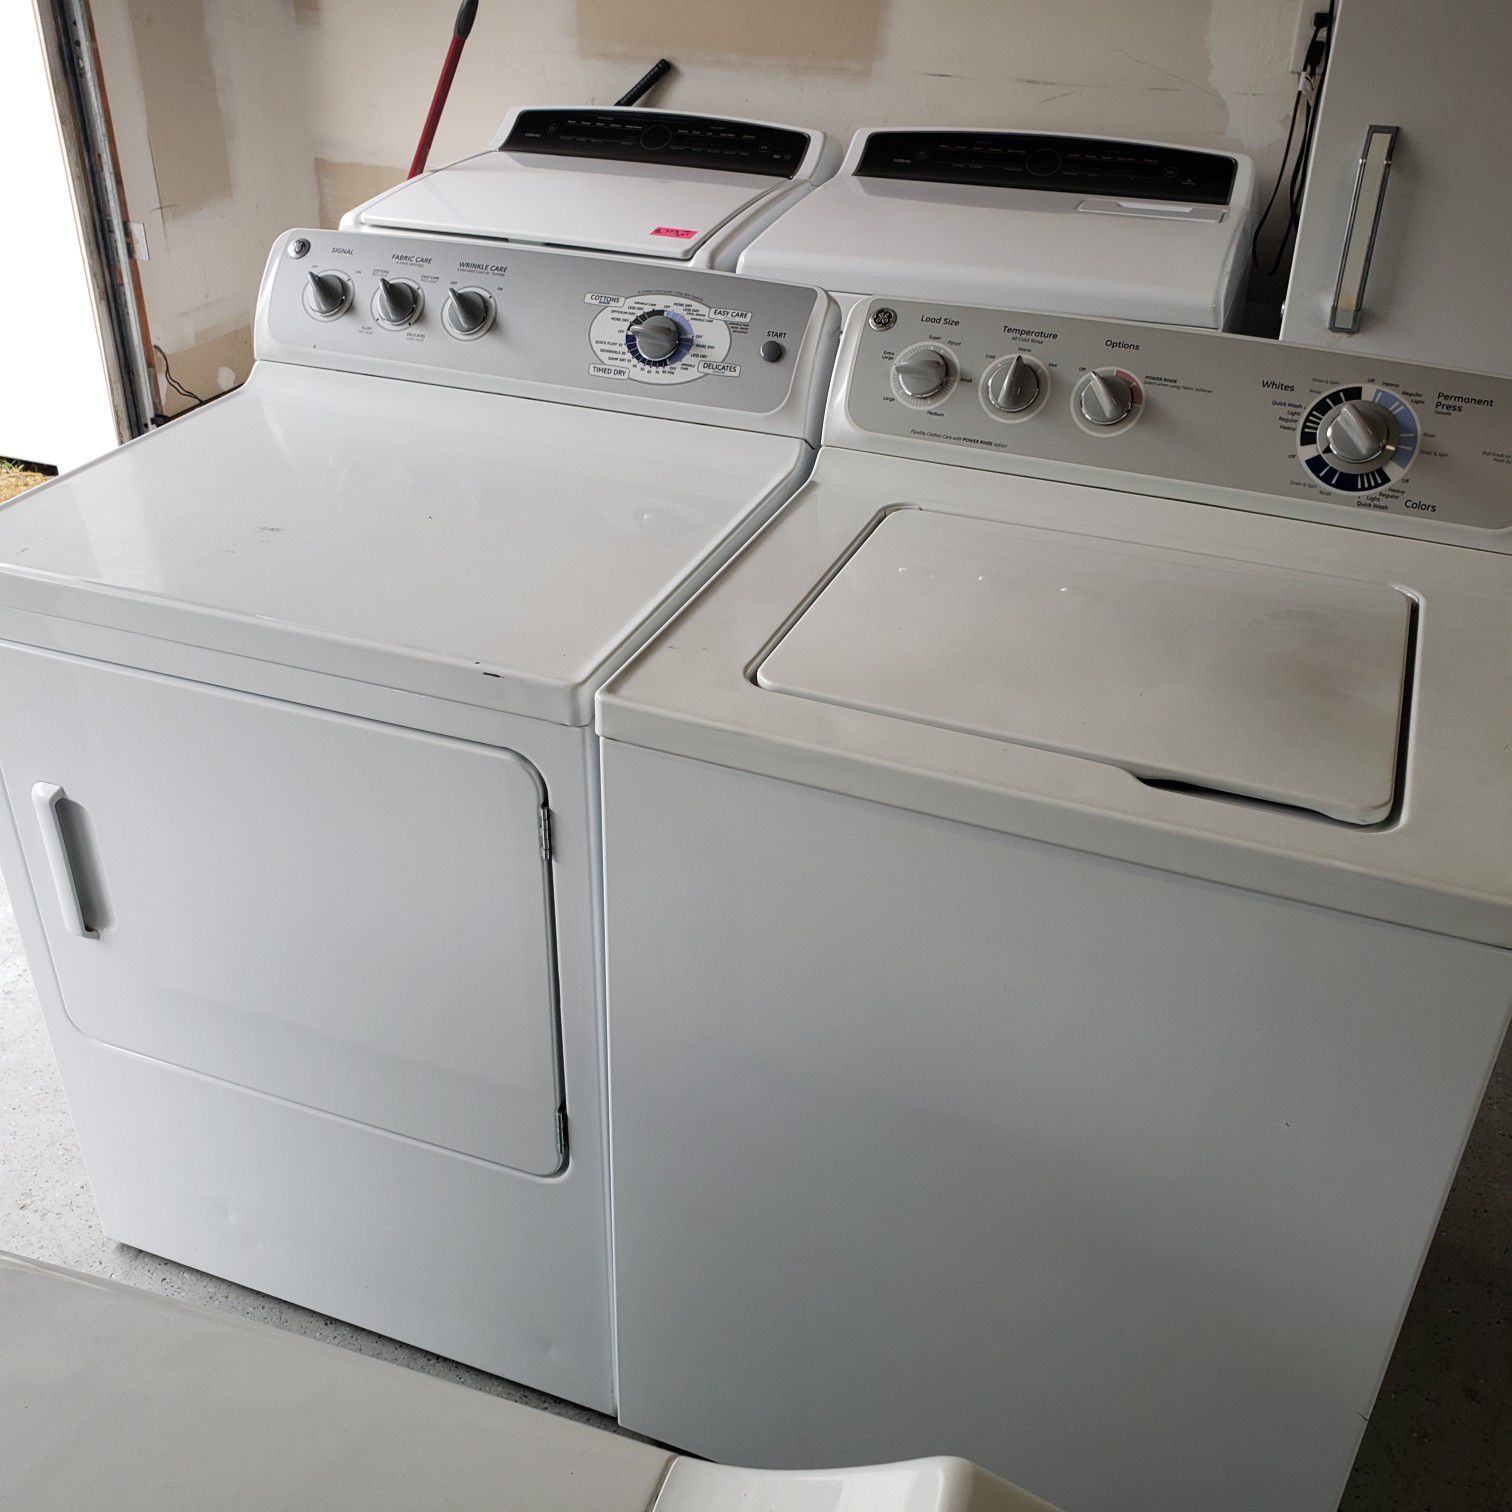 Super Savings on GE Top Load Washer and Electric Dryer Set